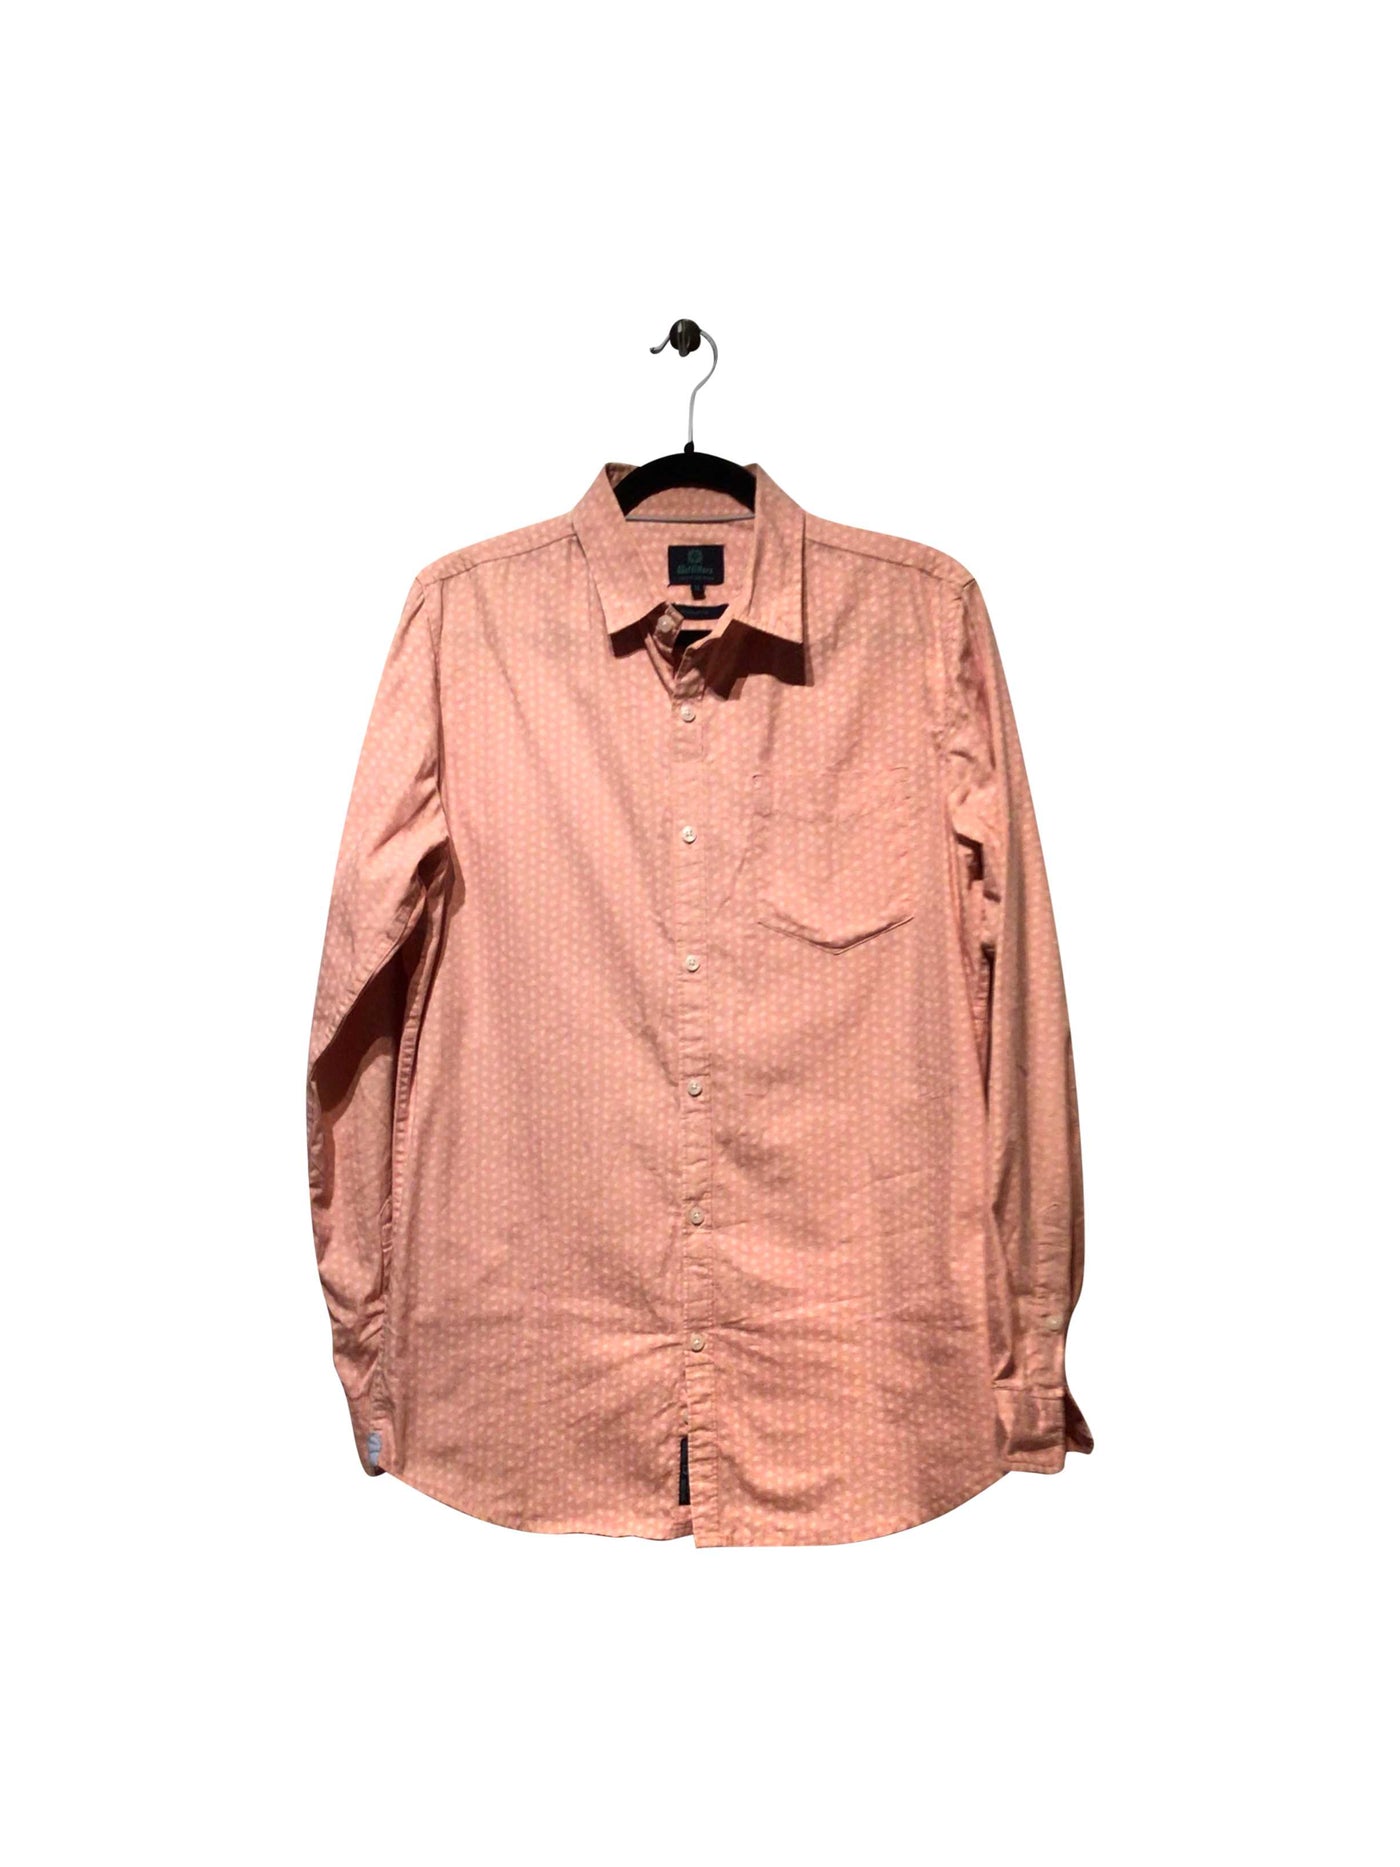 OUTFITTERS Regular fit Button-down Top in Pink  -  M  9.99 Koop